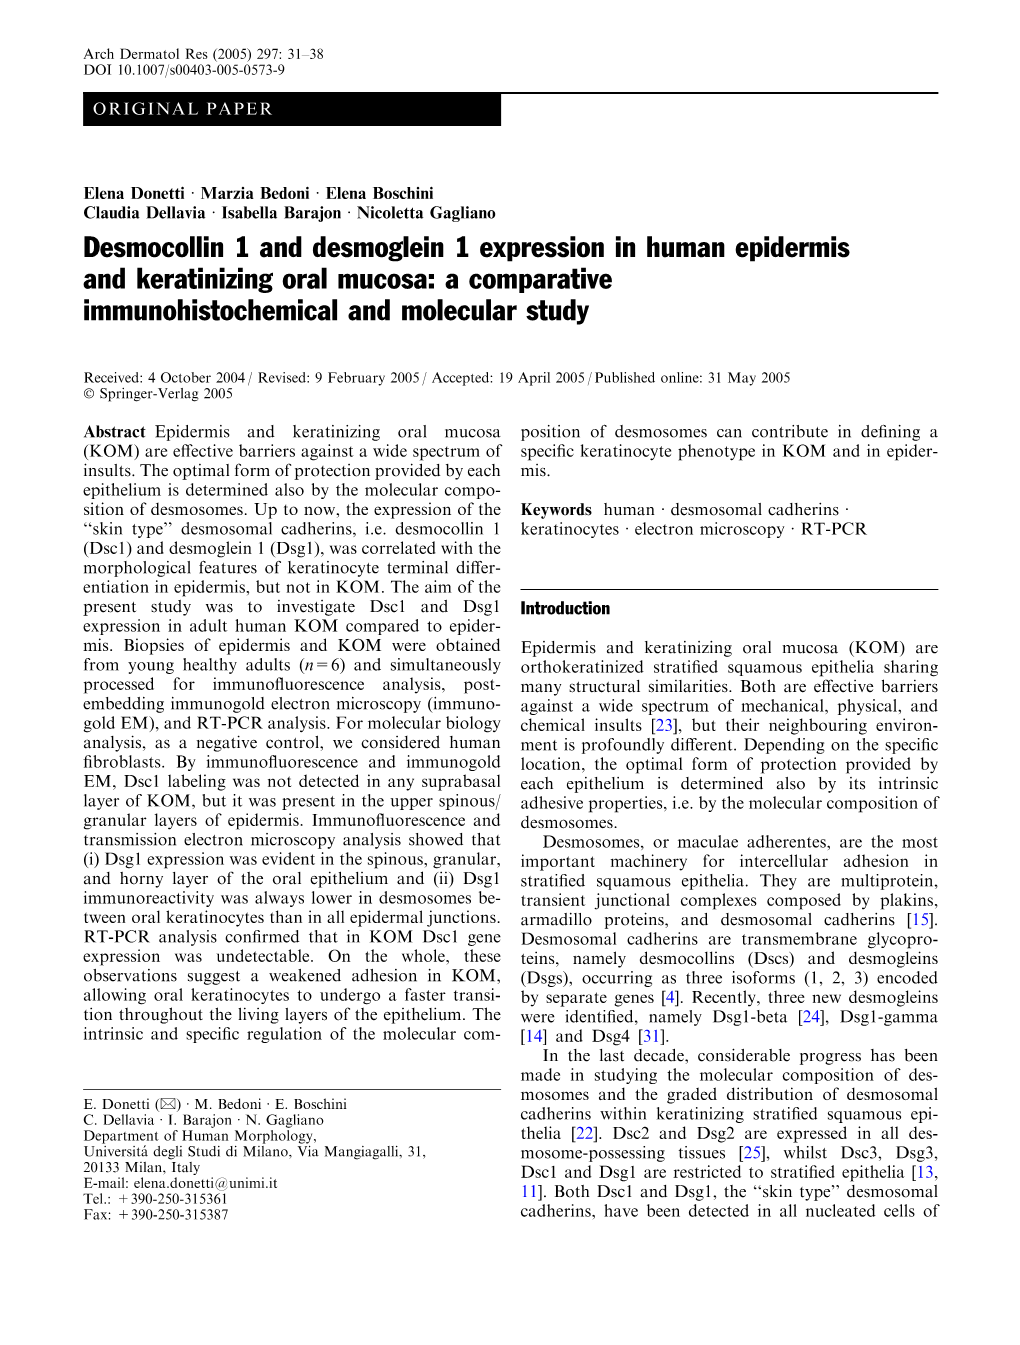 Desmocollin 1 and Desmoglein 1 Expression in Human Epidermis and Keratinizing Oral Mucosa: a Comparative Immunohistochemical and Molecular Study